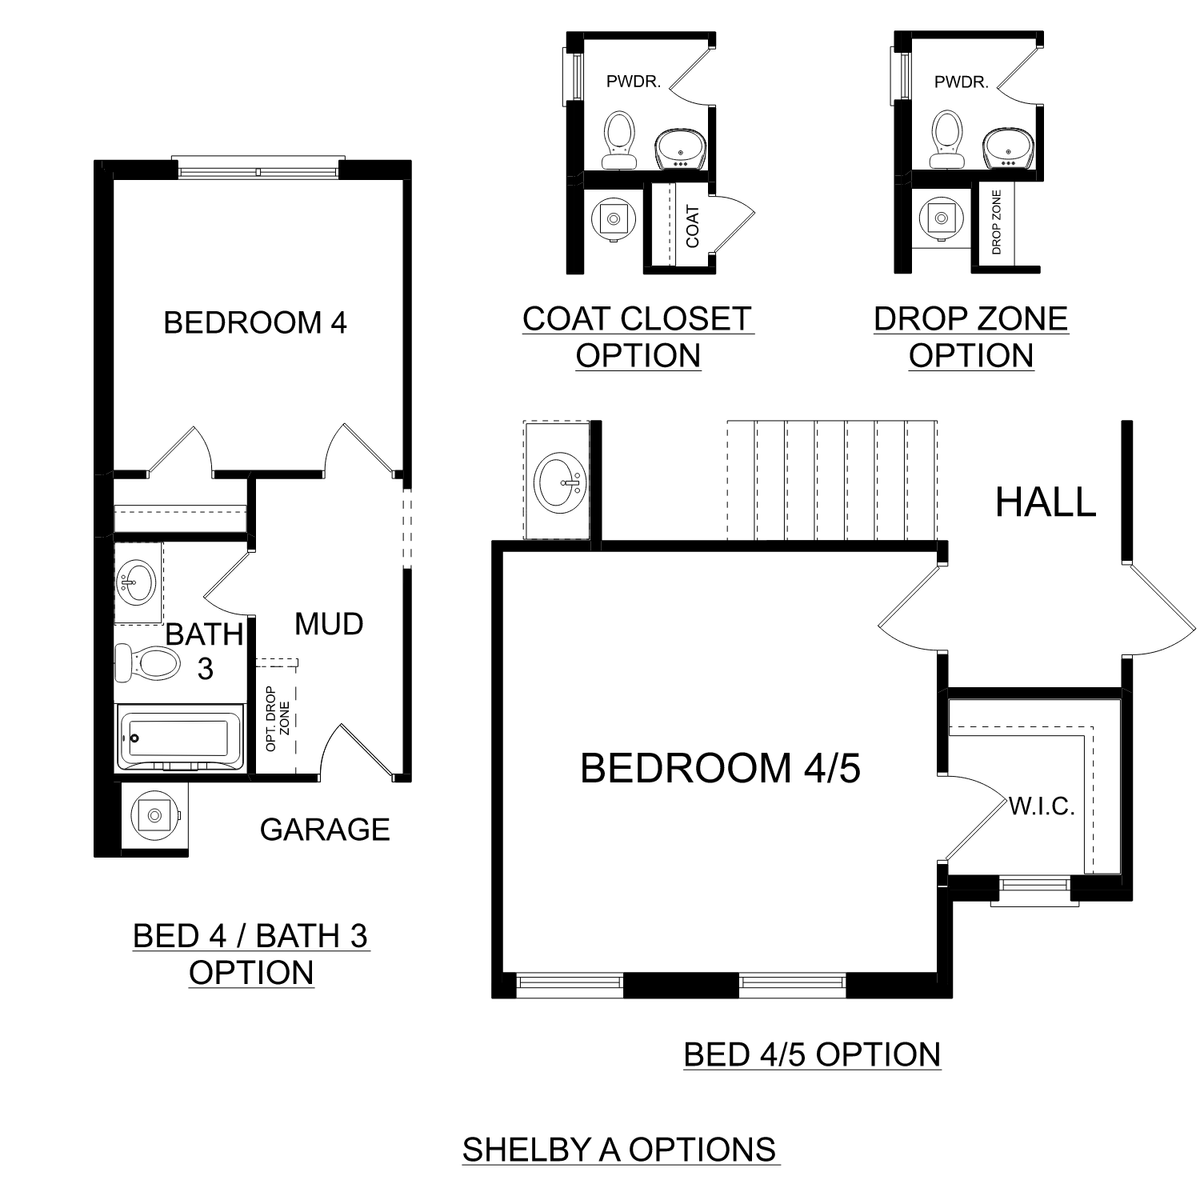 3 - The Shelby A buildable floor plan layout in Davidson Homes' The Meadows community.